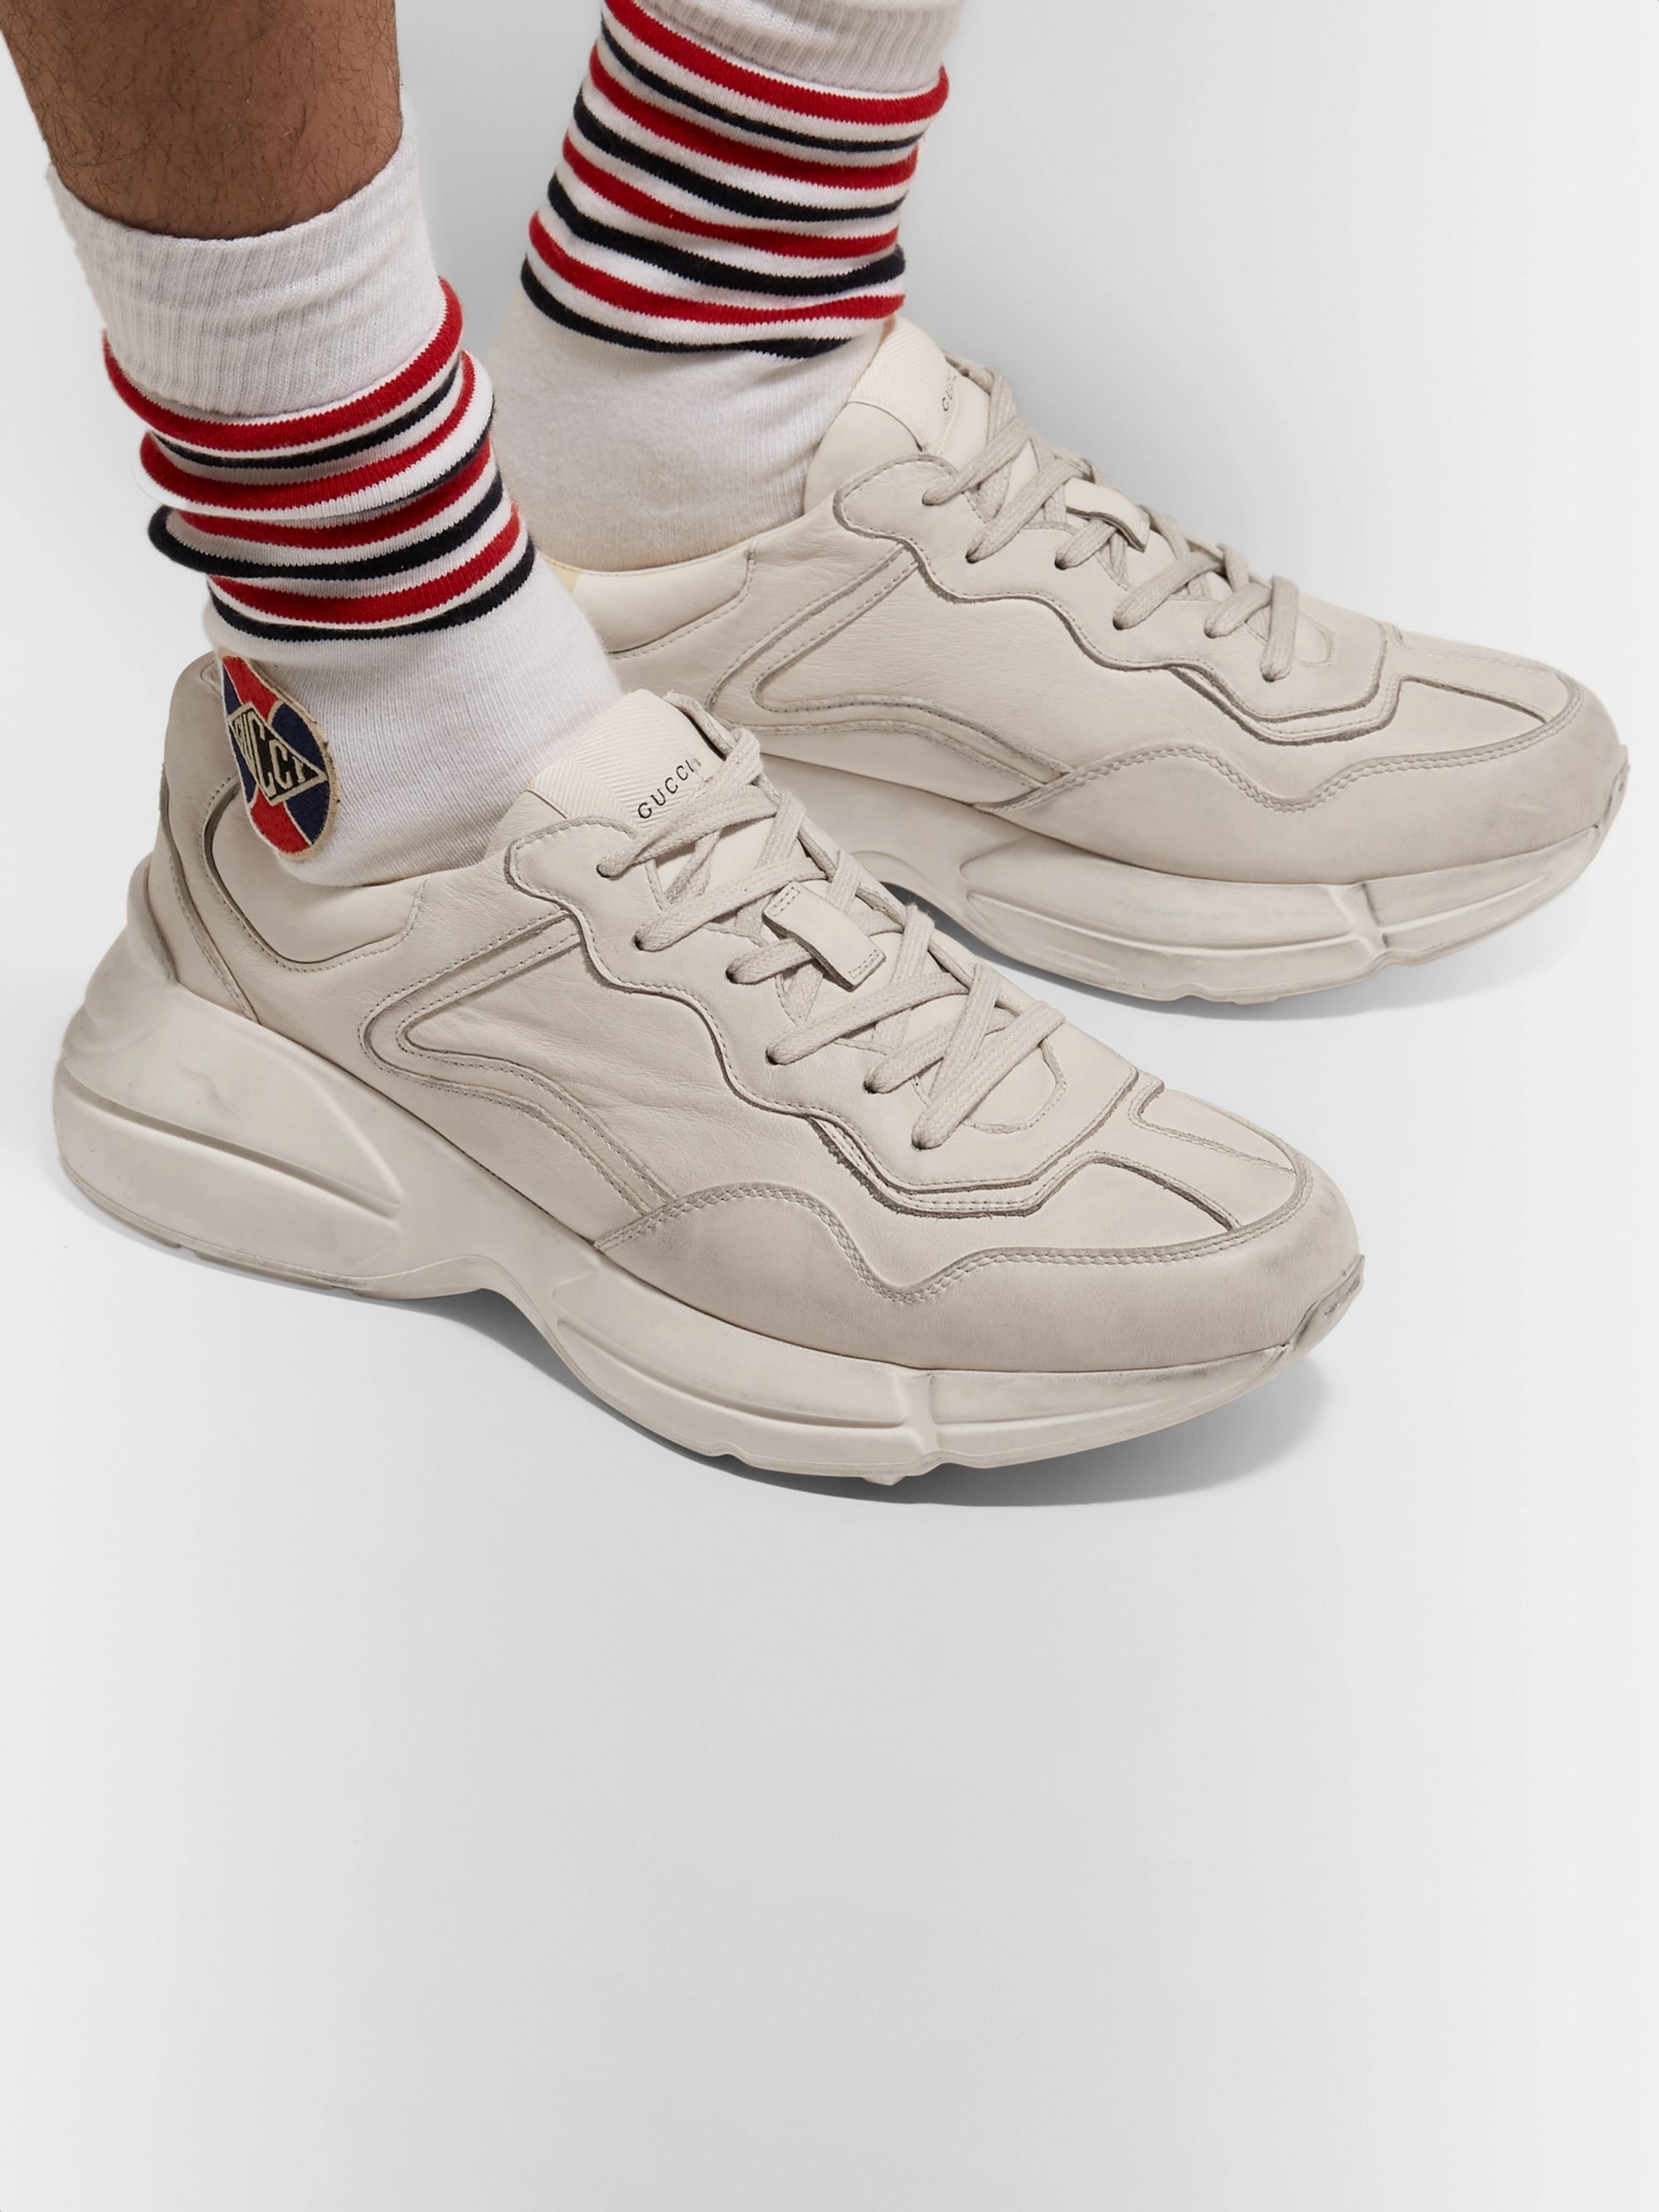 gucci rhyton distressed leather sneakers